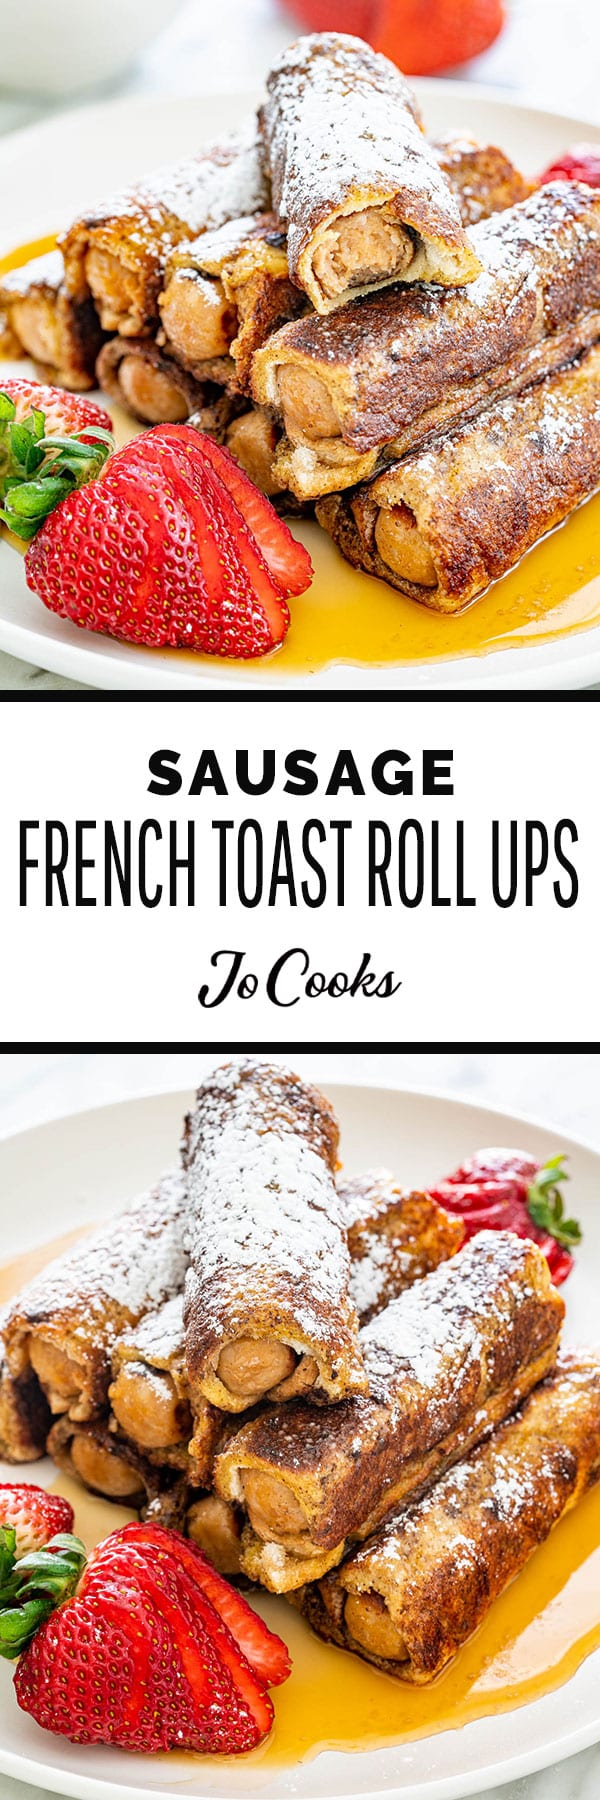 Sausage French Toast Roll Ups - Jo Cooks